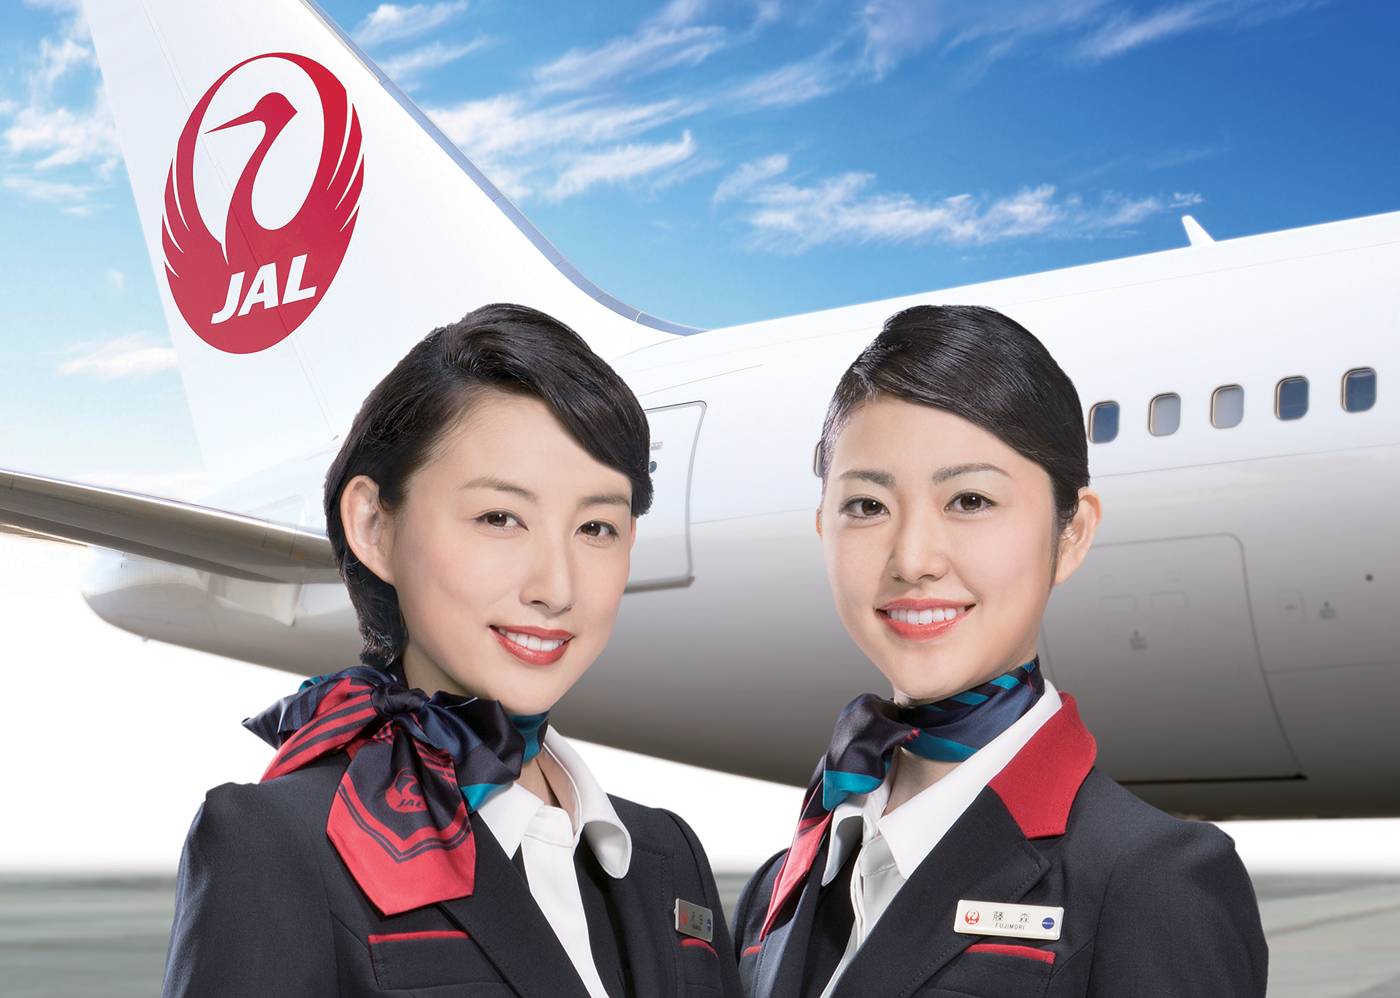 How do i contact japan airlines(jal) customer service